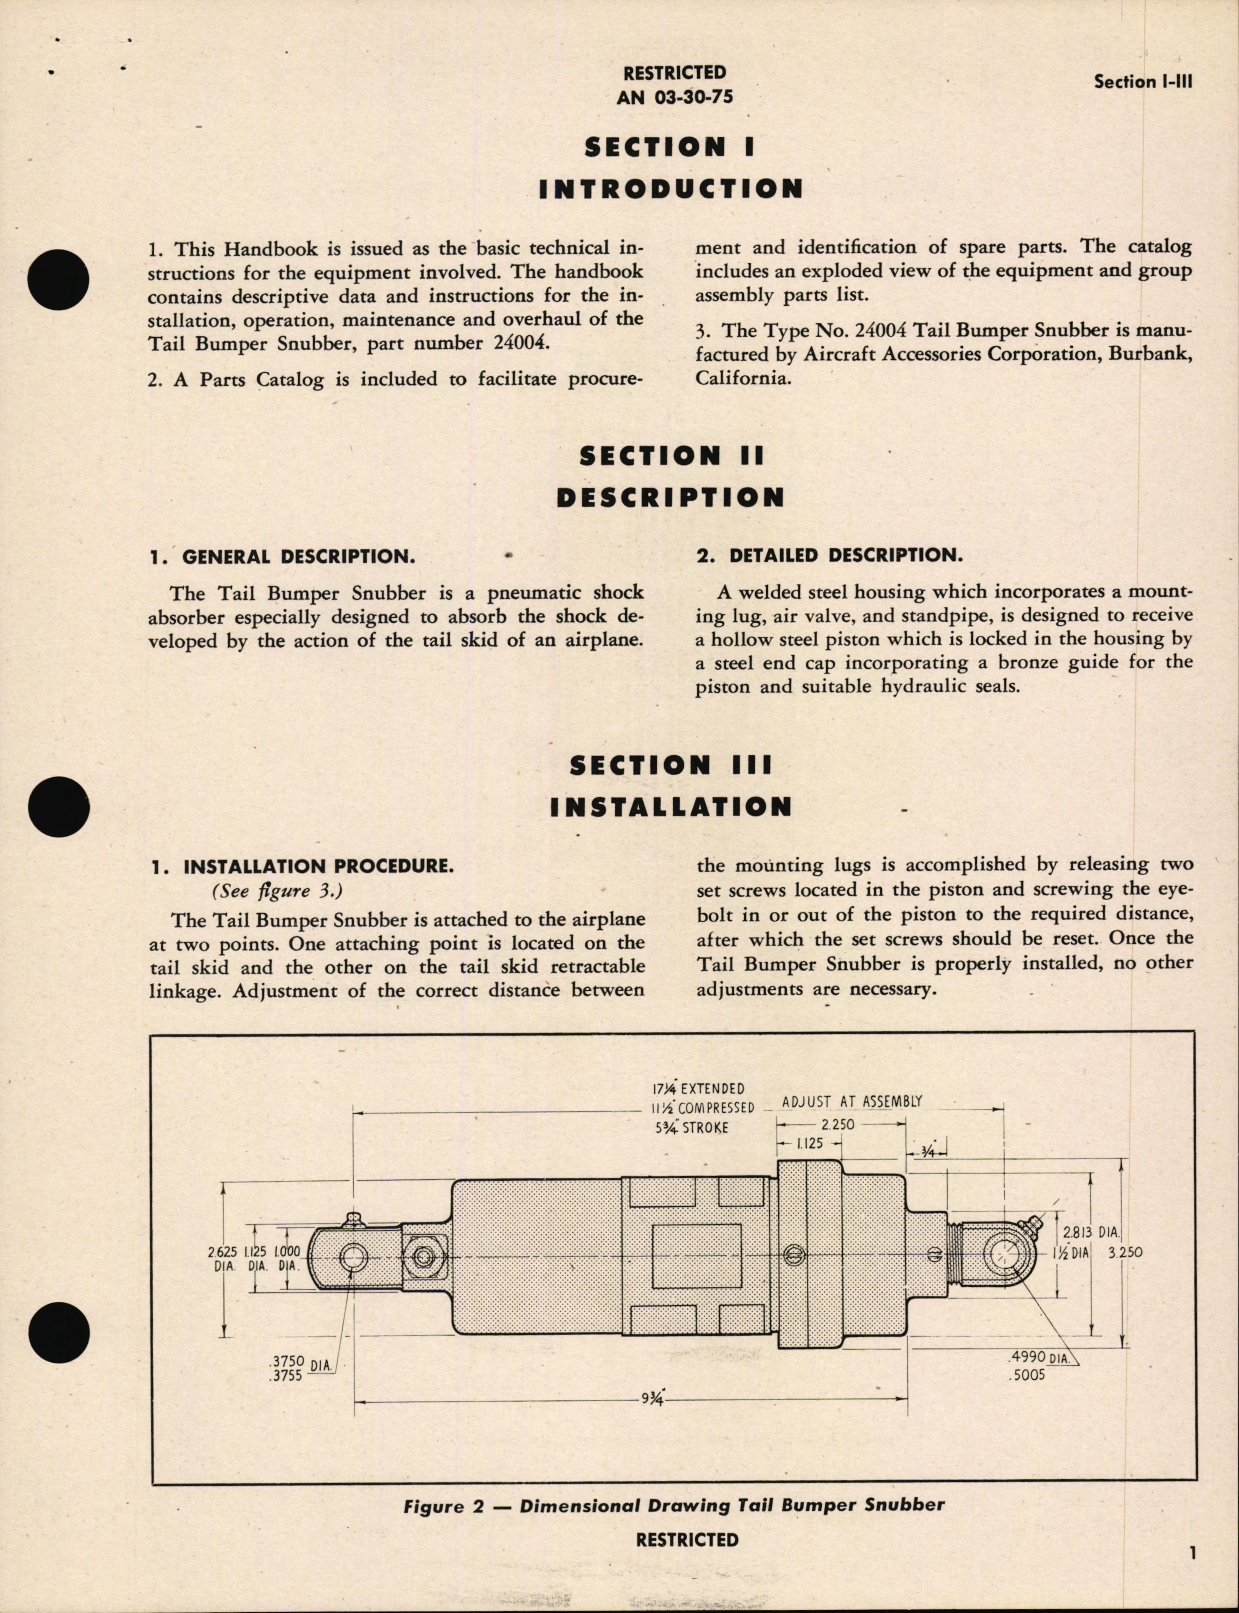 Sample page 5 from AirCorps Library document: Handbook of Instructions with Parts Catalog for Tail Bumper Snubber Part Number 24004